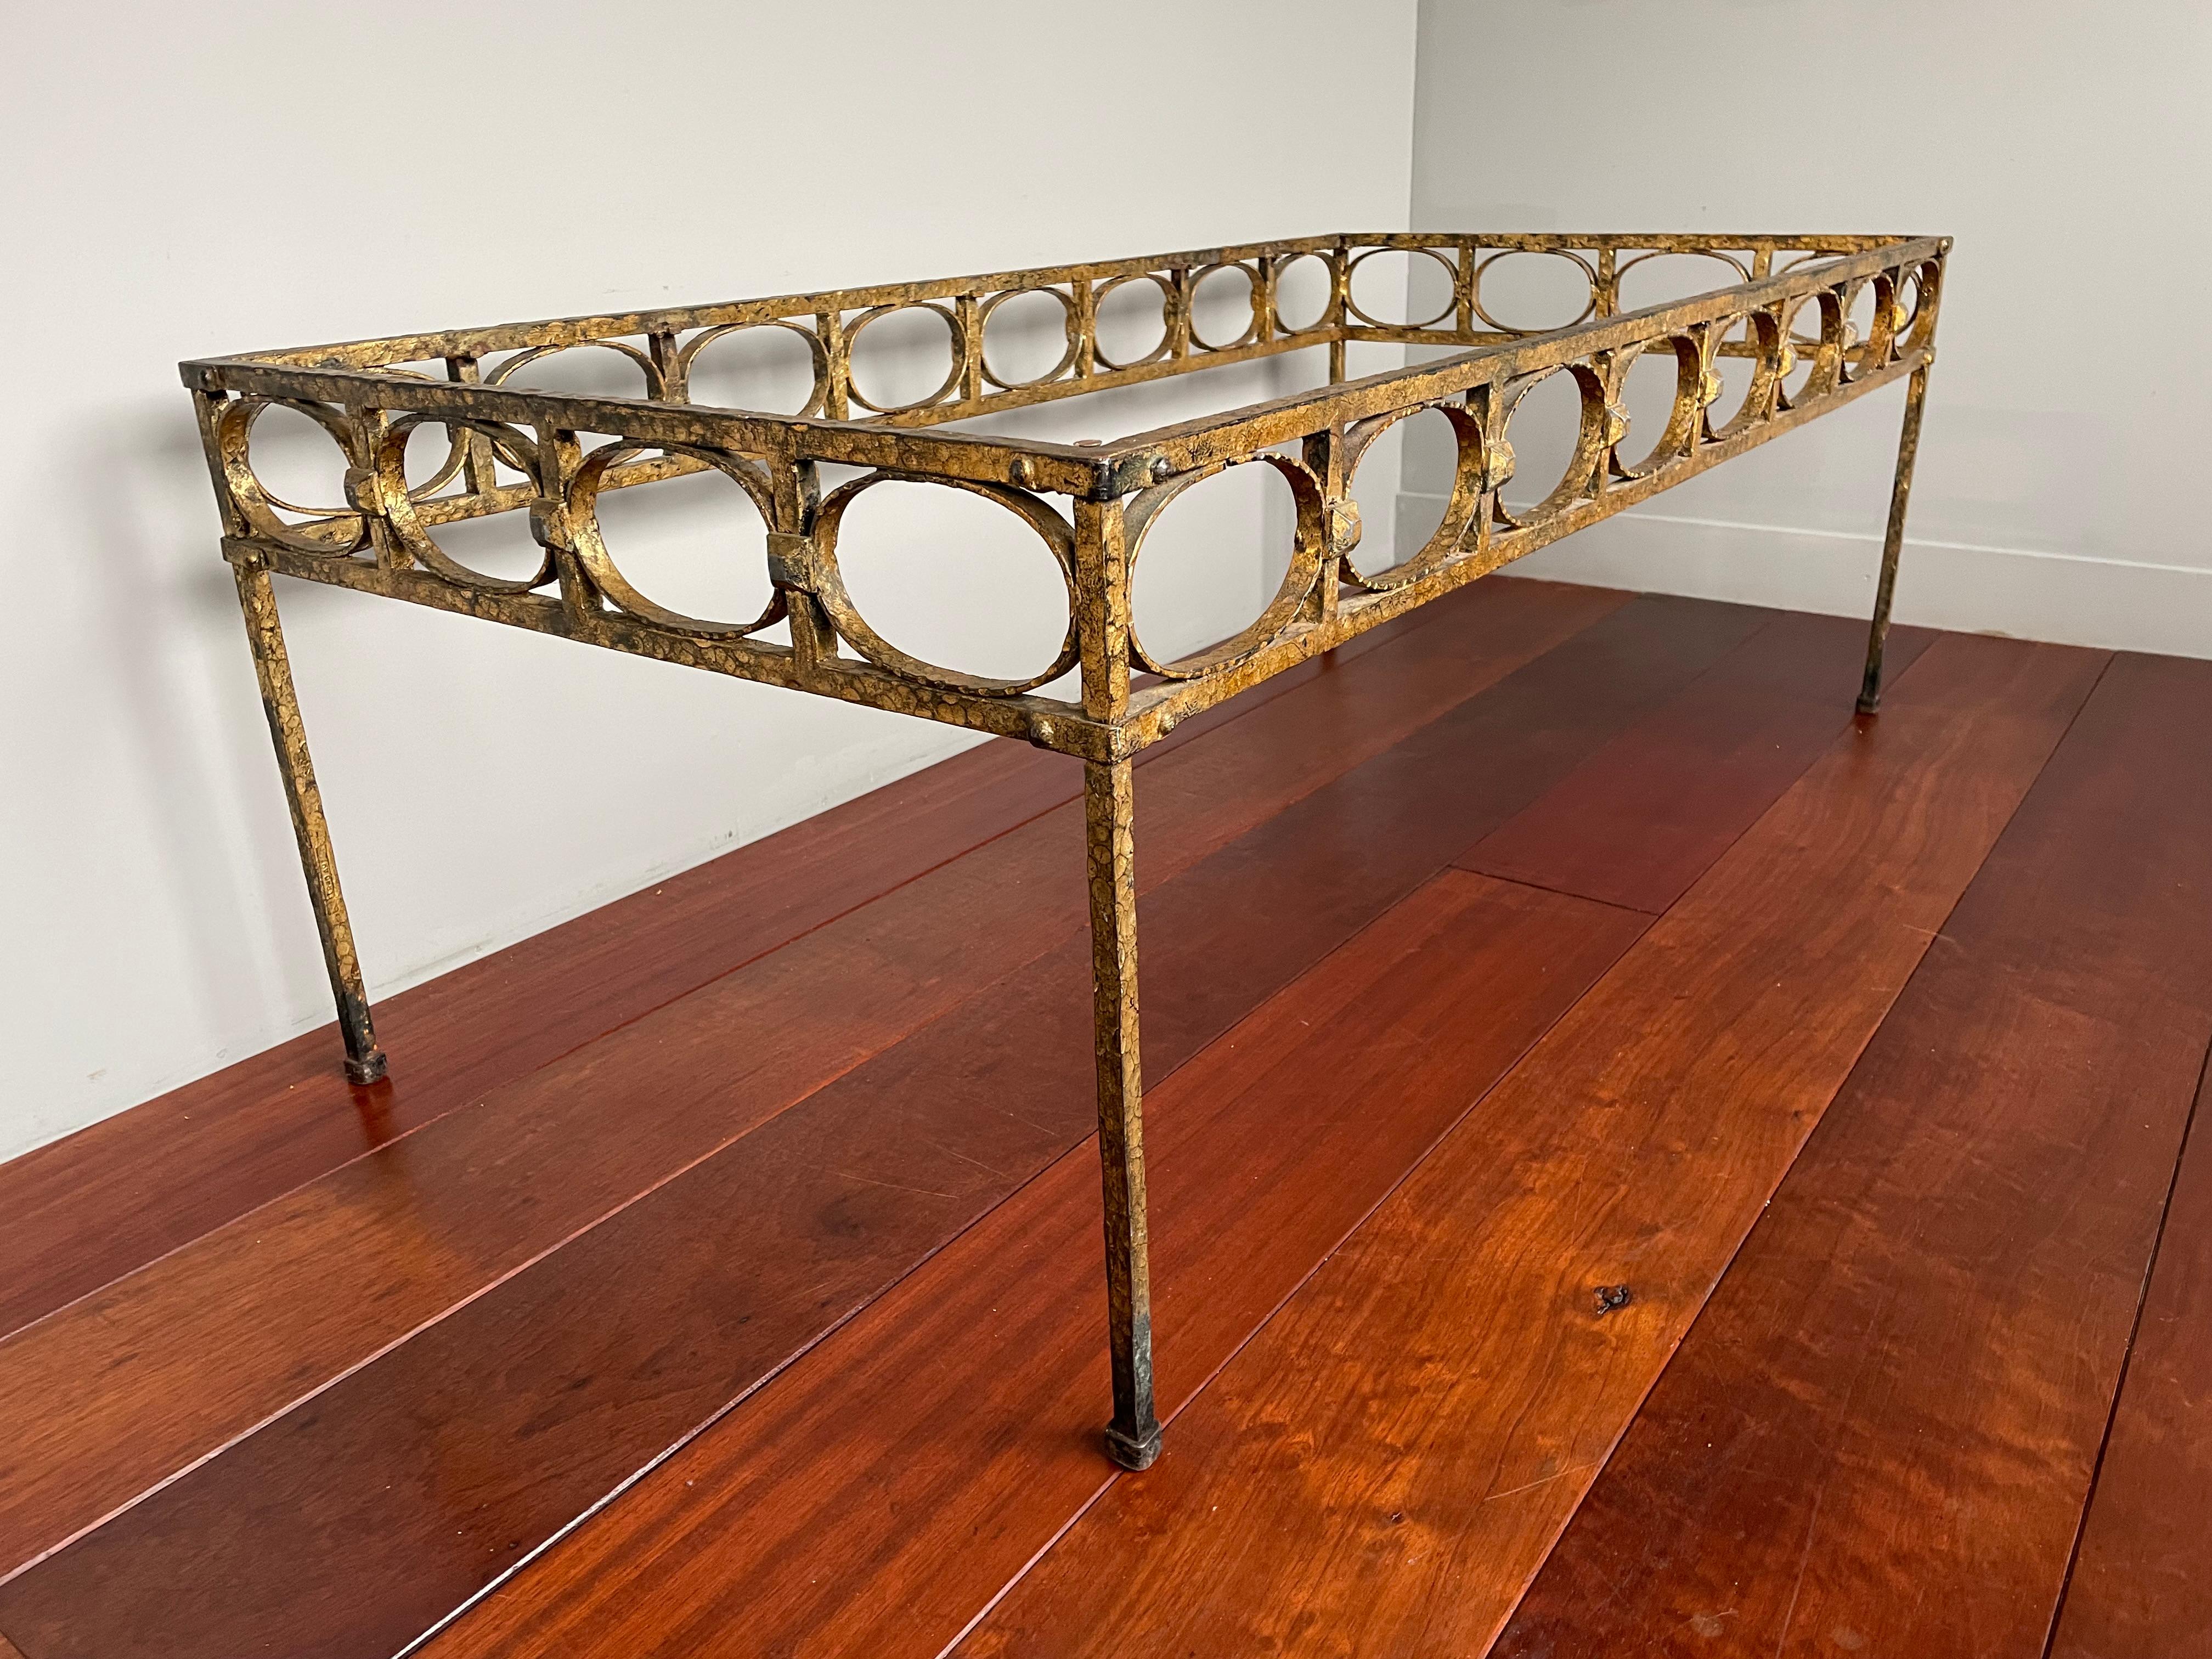 Very rare and truly stylish, hand forged and gilt, wrought iron coffee table base.

This beautiful design and uniquely hand-crafted table is by a known Spanish maker. To find such a truly unique, top quality made and ideal size coffee table base in